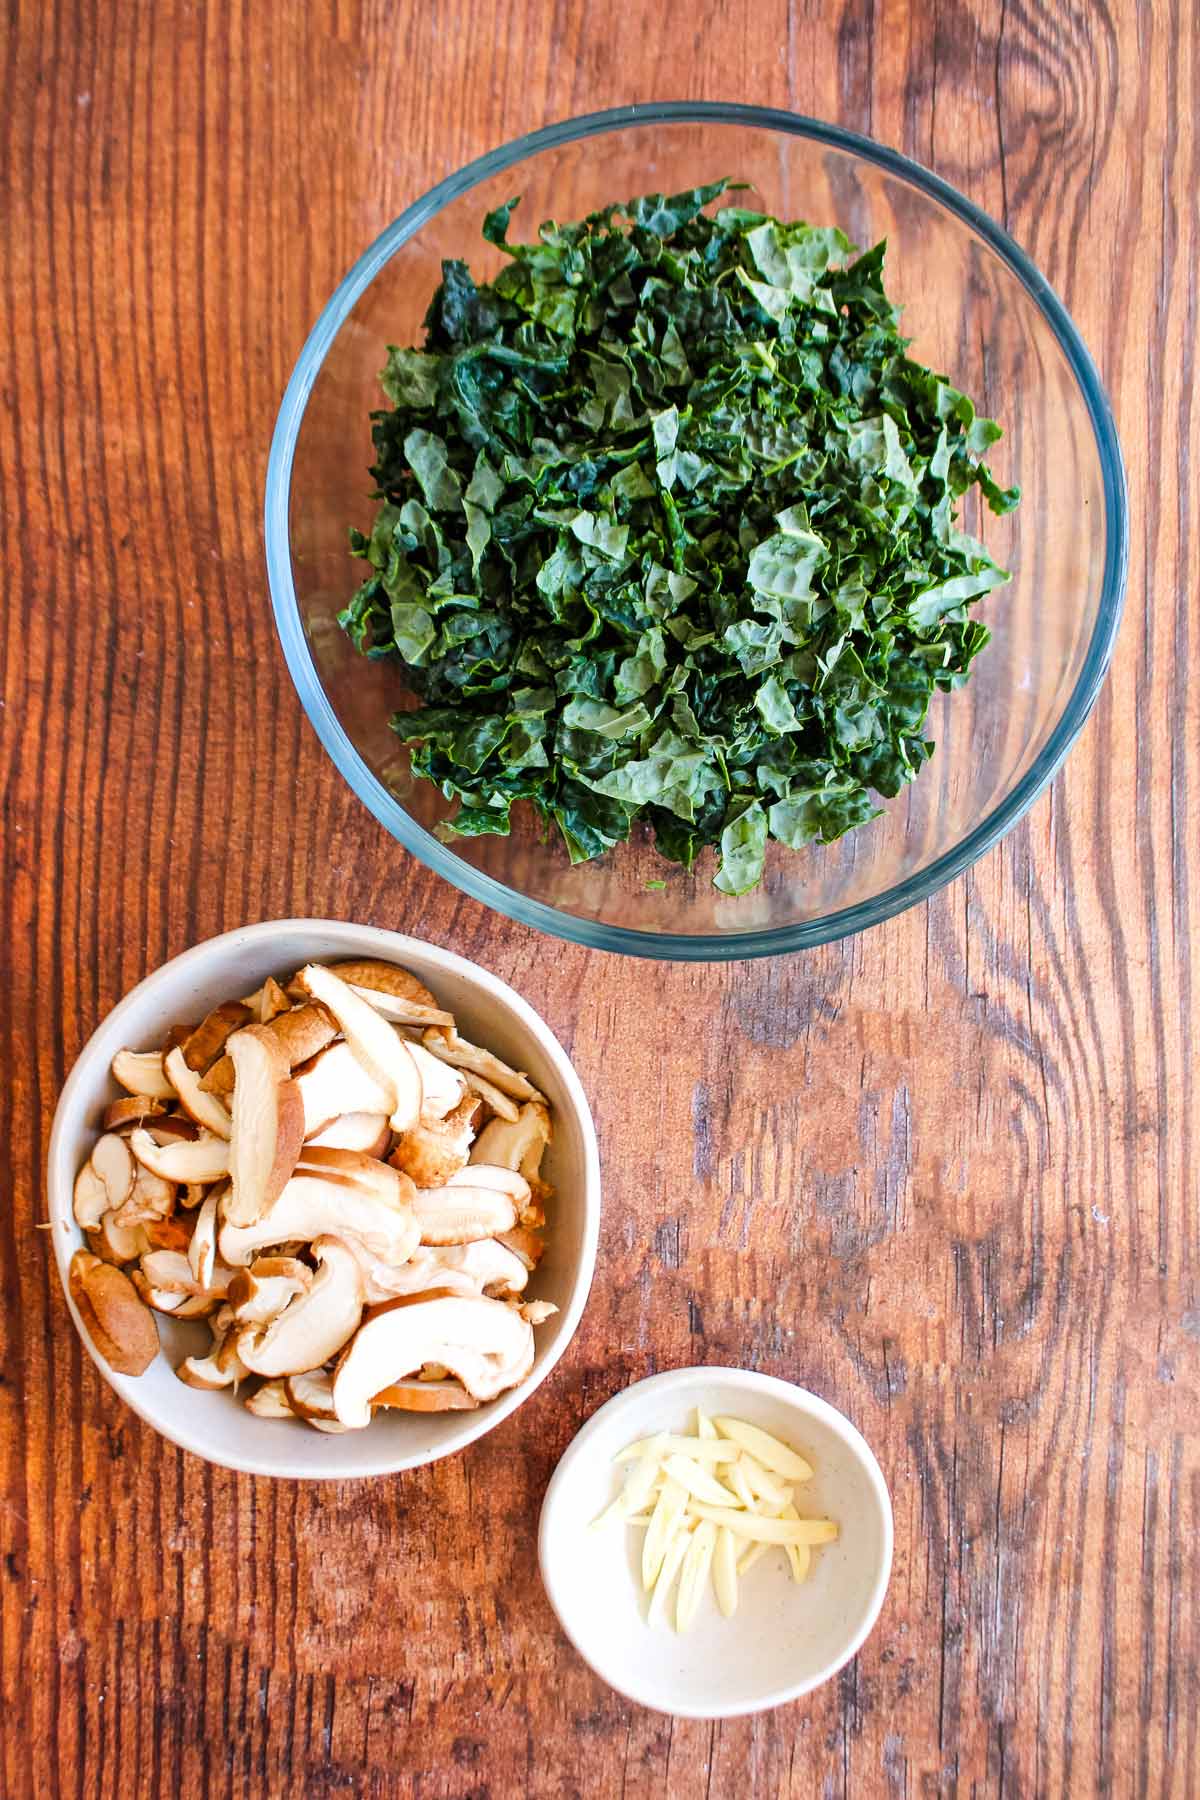 Bowl of chopped kale, sliced mushrooms and chopped garlic on the table.